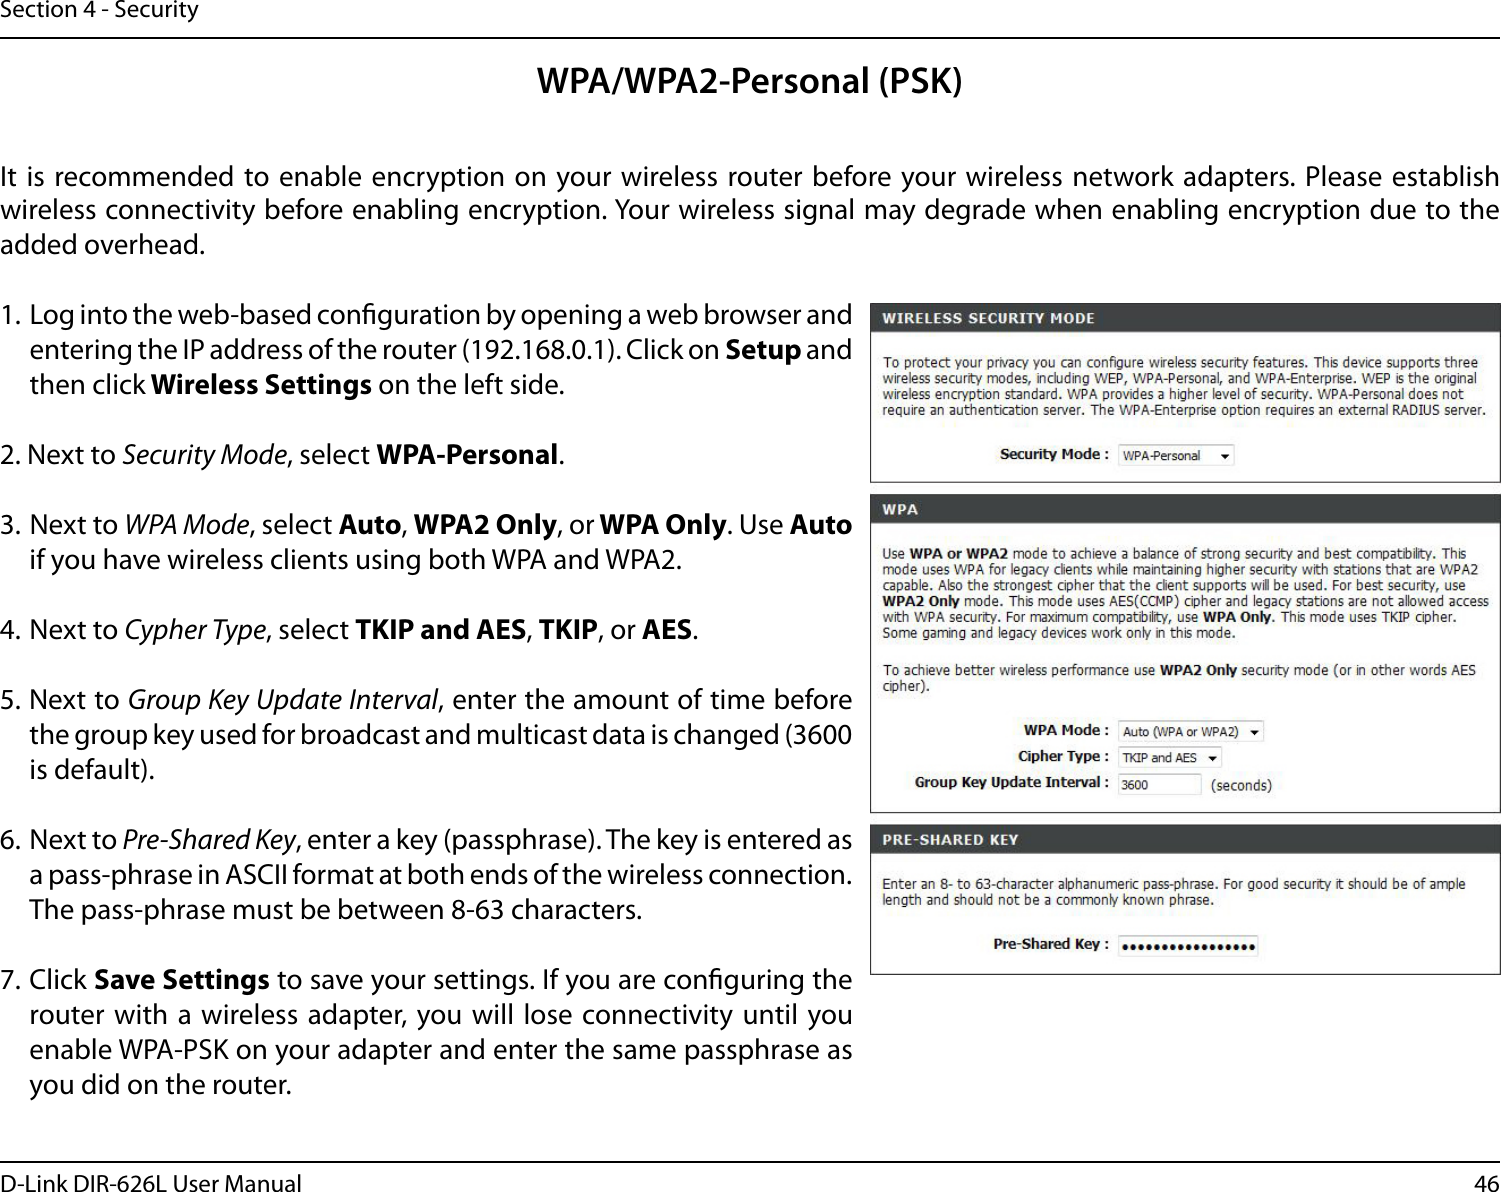 46D-Link DIR-626L User ManualSection 4 - SecurityWPA/WPA2-Personal (PSK)It  is recommended to enable encryption on your wireless router before your wireless network adapters. Please establish wireless connectivity before enabling encryption. Your wireless signal may degrade when enabling encryption due to the added overhead.1. Log into the web-based conguration by opening a web browser and entering the IP address of the router (192.168.0.1). Click on Setup and then click Wireless Settings on the left side.2. Next to Security Mode, select WPA-Personal.3. Next to WPA Mode, select Auto, WPA2 Only, or WPA Only. Use Auto if you have wireless clients using both WPA and WPA2.4. Next to Cypher Type, select TKIP and AES, TKIP, or AES.5. Next to Group Key Update Interval, enter the amount of time before the group key used for broadcast and multicast data is changed (3600 is default).6. Next to Pre-Shared Key, enter a key (passphrase). The key is entered as a pass-phrase in ASCII format at both ends of the wireless connection. The pass-phrase must be between 8-63 characters. 7. Click Save Settings to save your settings. If you are conguring the router with a wireless adapter, you will  lose connectivity until you enable WPA-PSK on your adapter and enter the same passphrase as you did on the router.